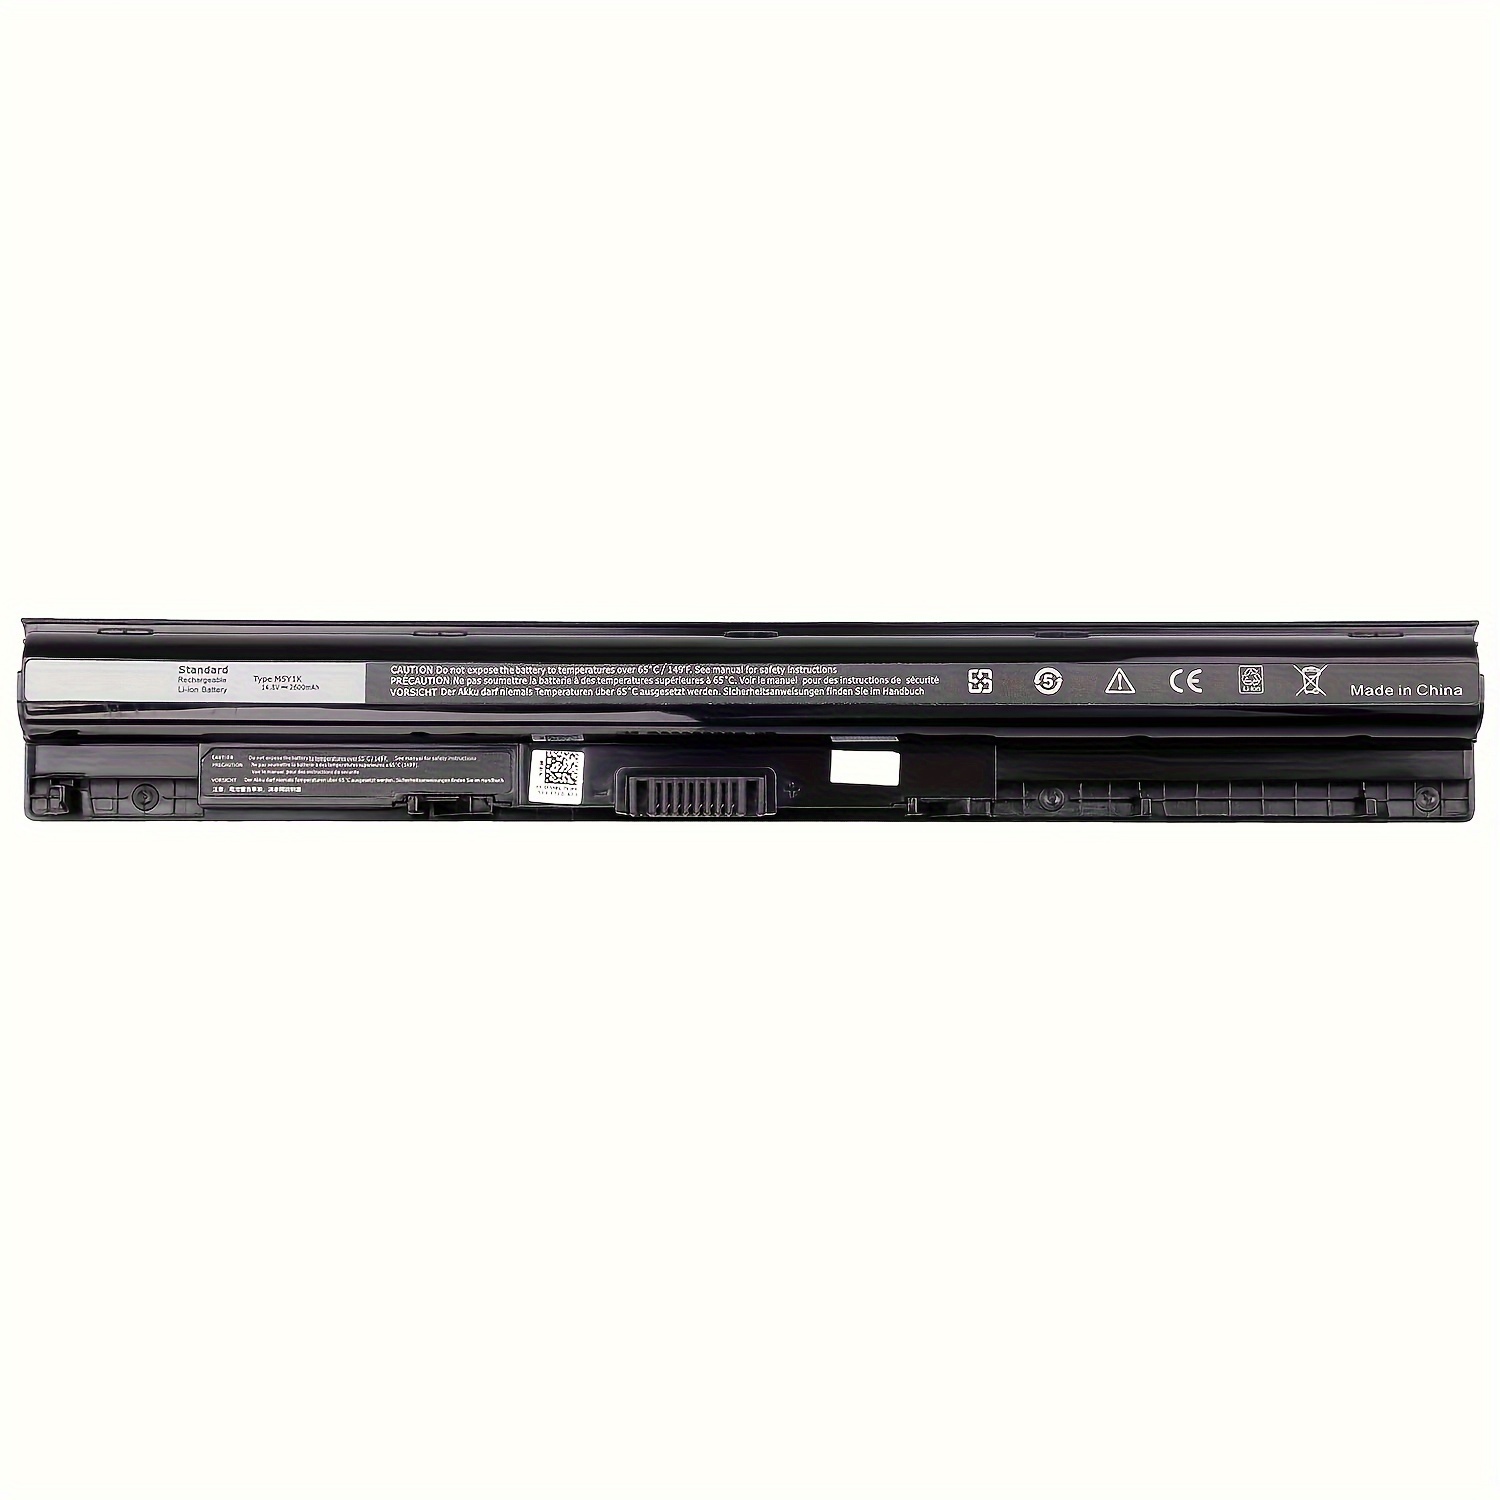 

Dell 40wh Standard Rechargeable Li-ion Battery Type M5y1k 14.8v, Dell 40 Whr 4-cell Primary Lithium-ion Battery, M5y1k 14.8v Dell Laptop Battery For Inspiron 15 5000 3000 3551 3558 5558 Yu12005-13001d